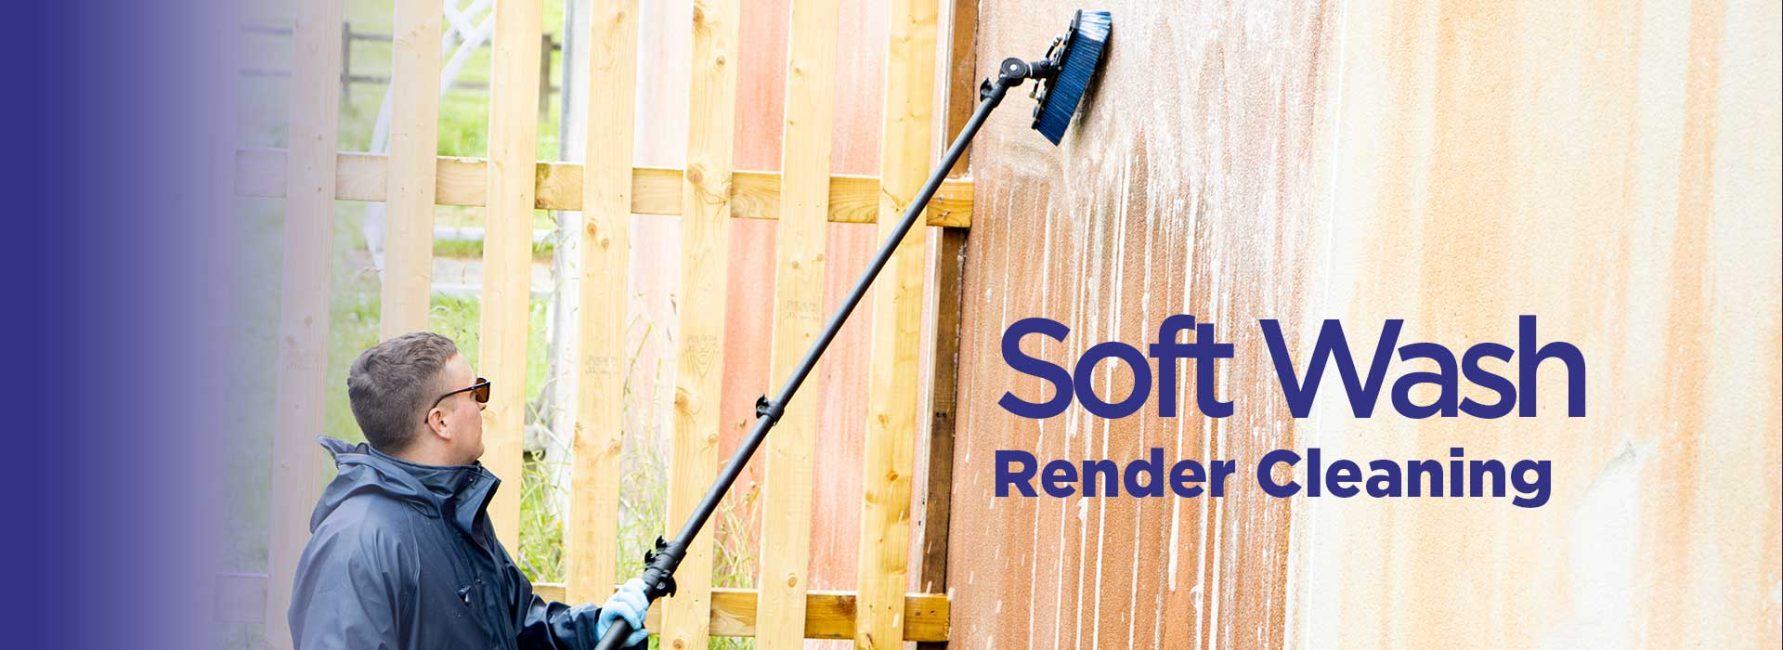 render cleaning with Streamline